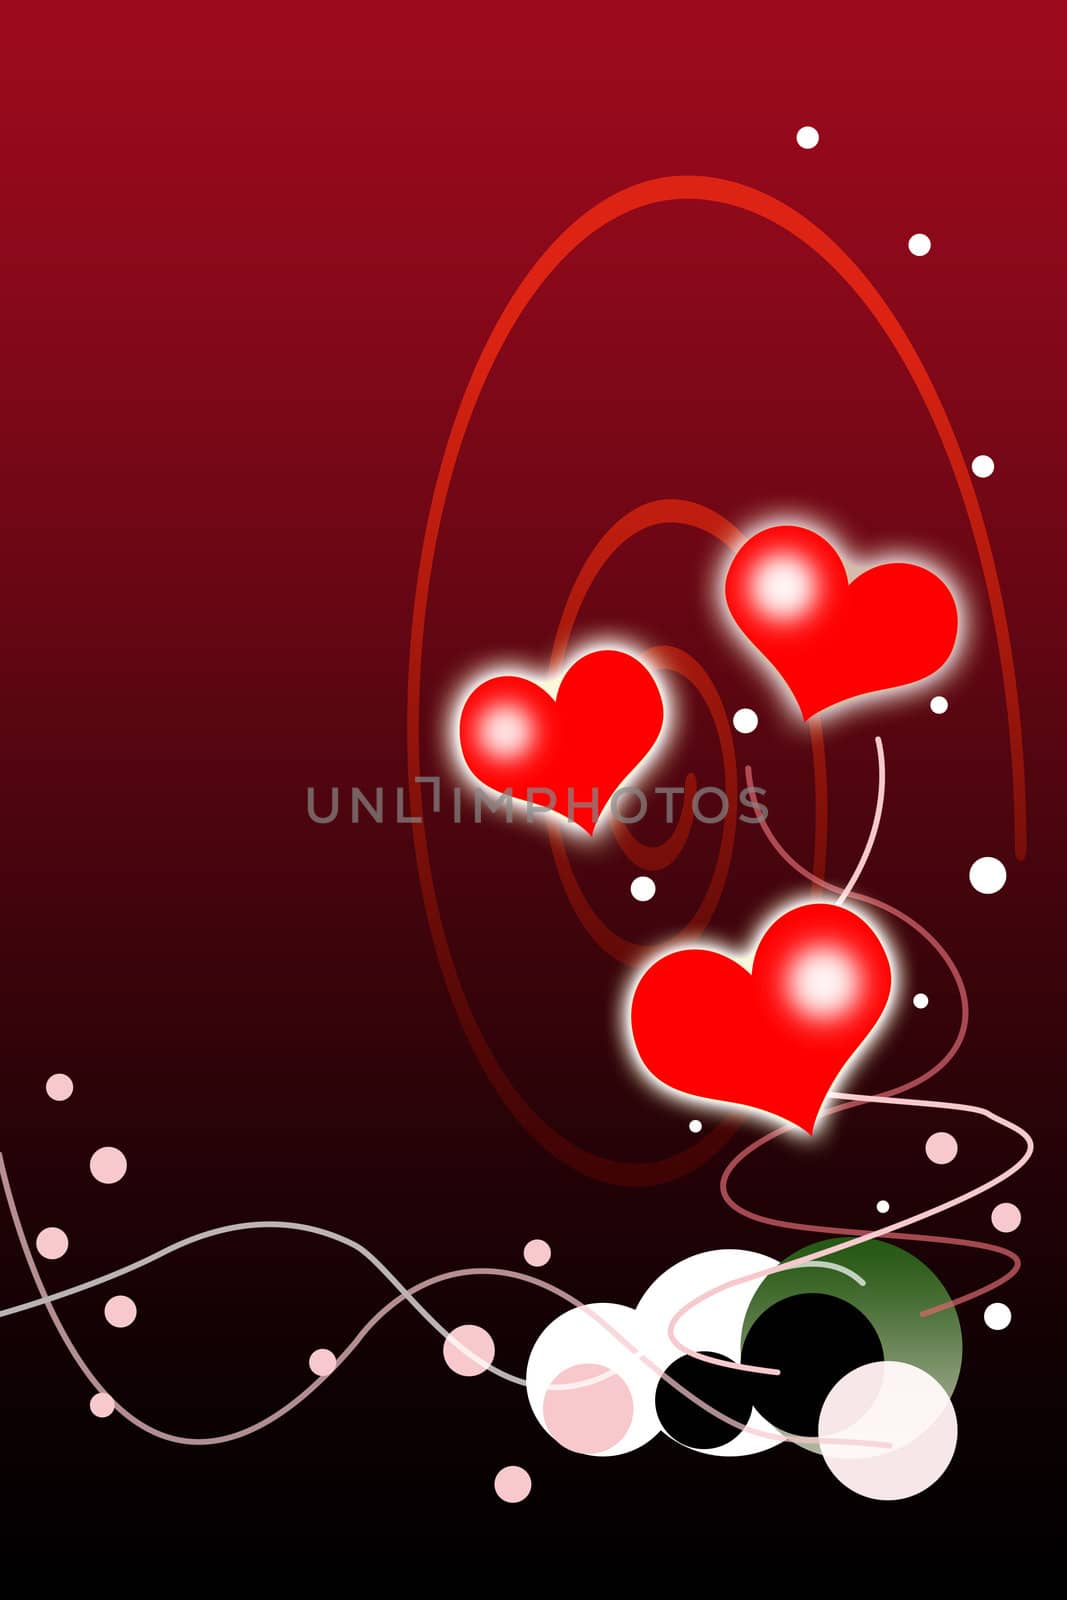 Valentines Day Background with Red and White Hearts by mwp1969